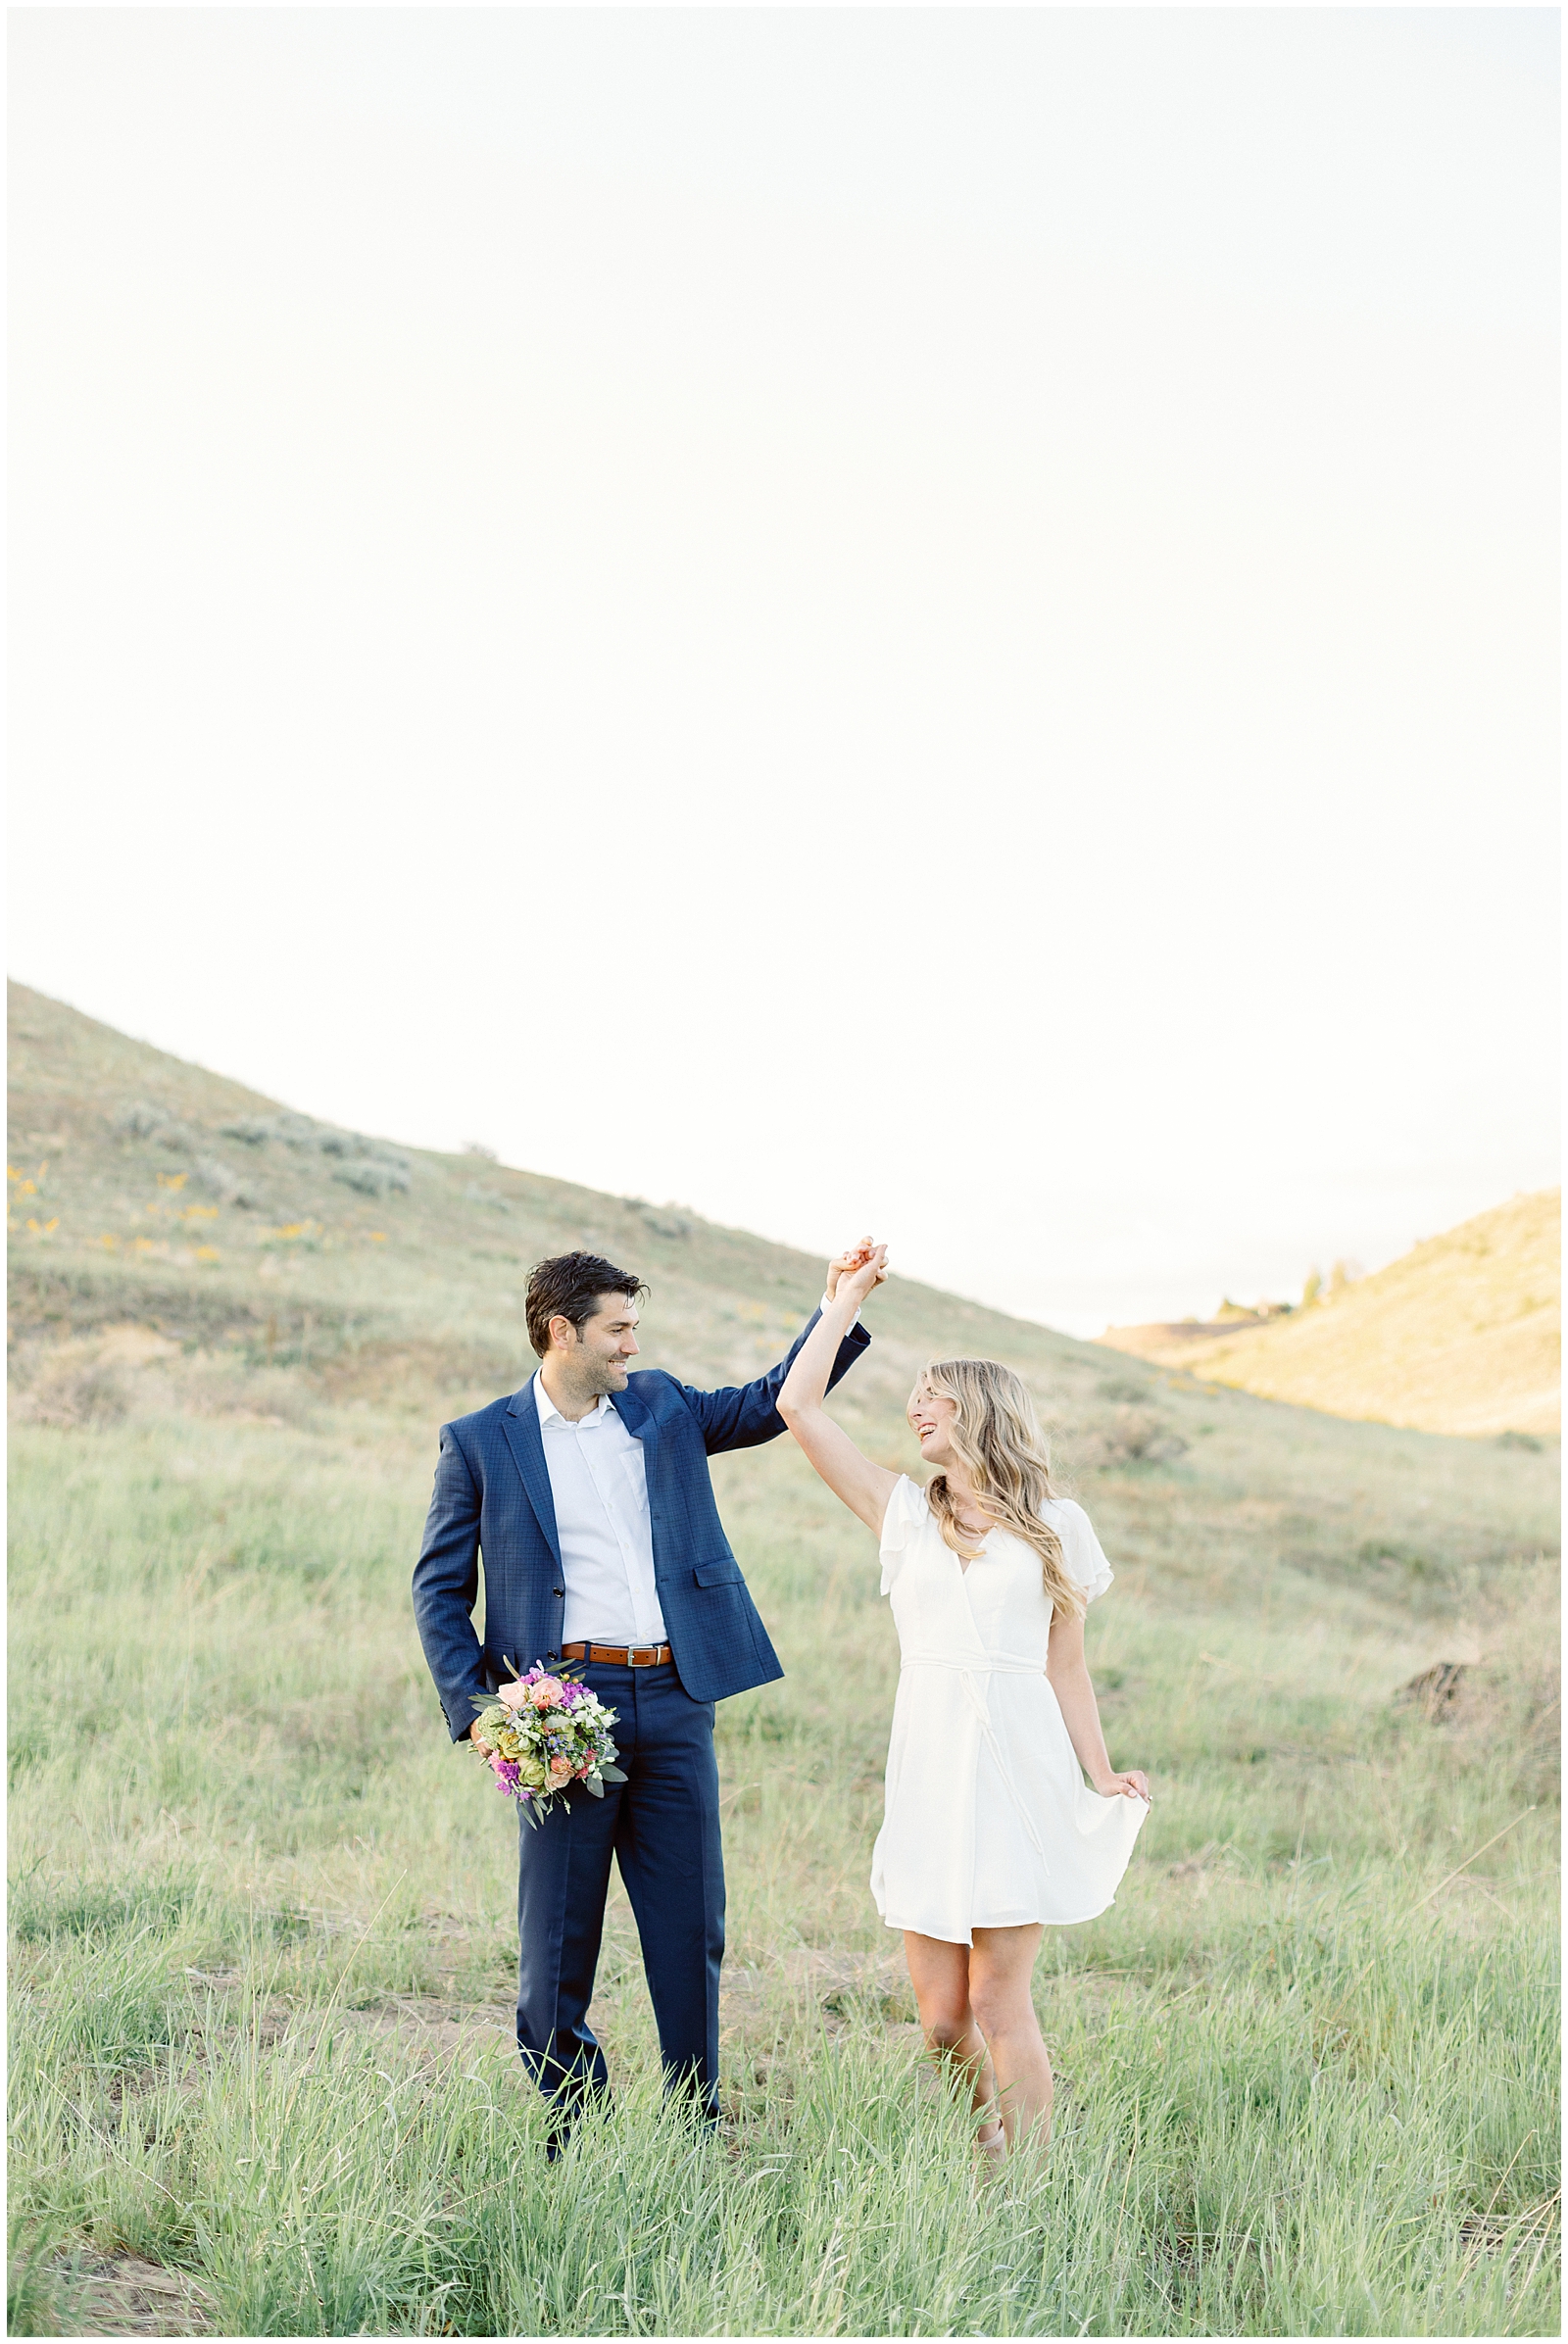 Dancing in the Fields at Elegant Boise Foothills Engagement Session - Boise Idaho Wedding Photographers